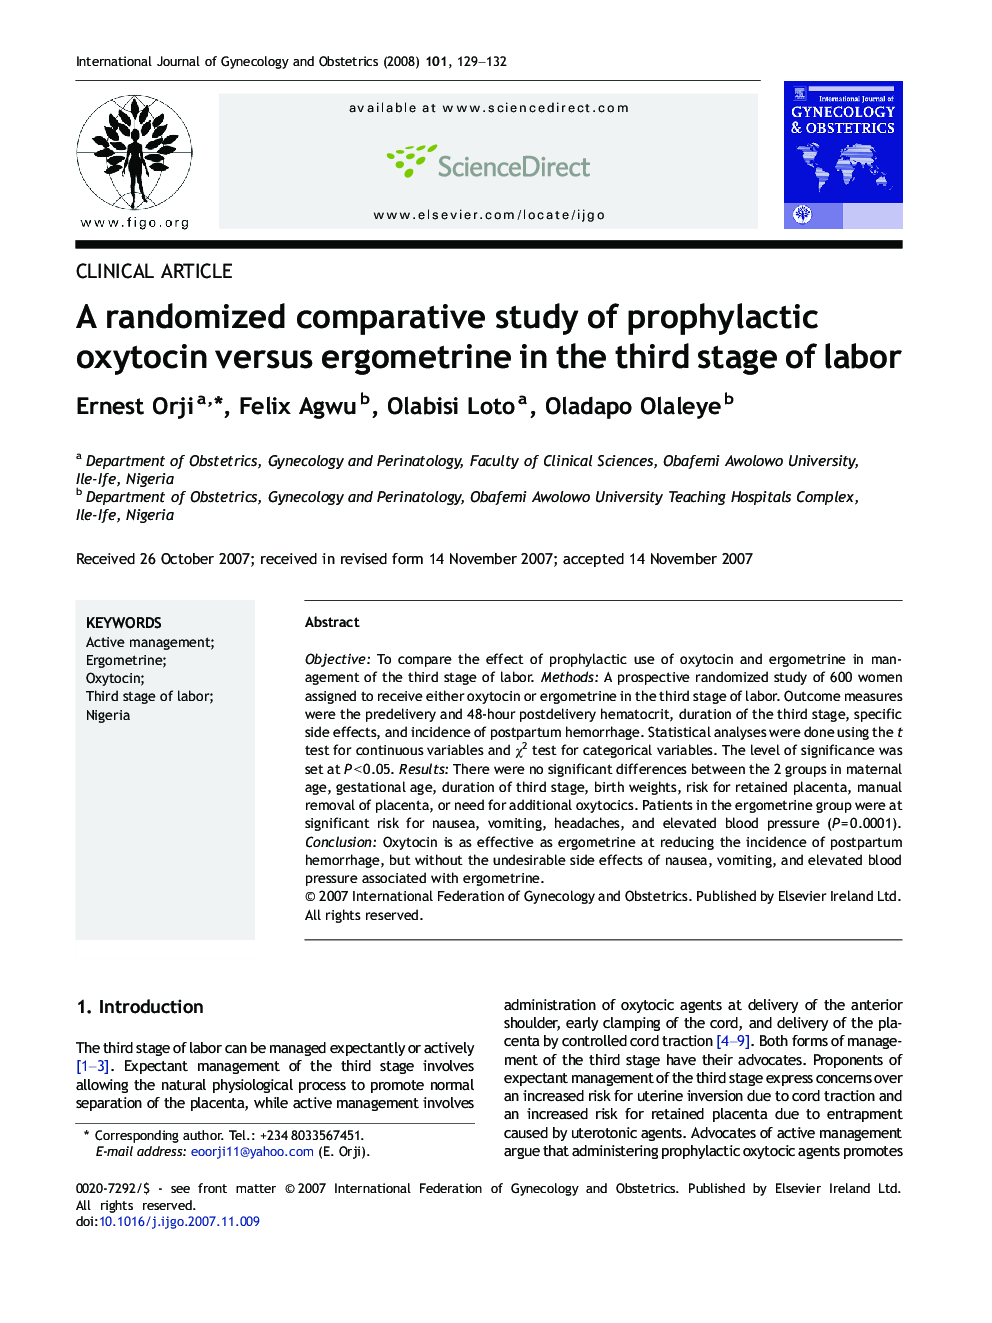 A randomized comparative study of prophylactic oxytocin versus ergometrine in the third stage of labor